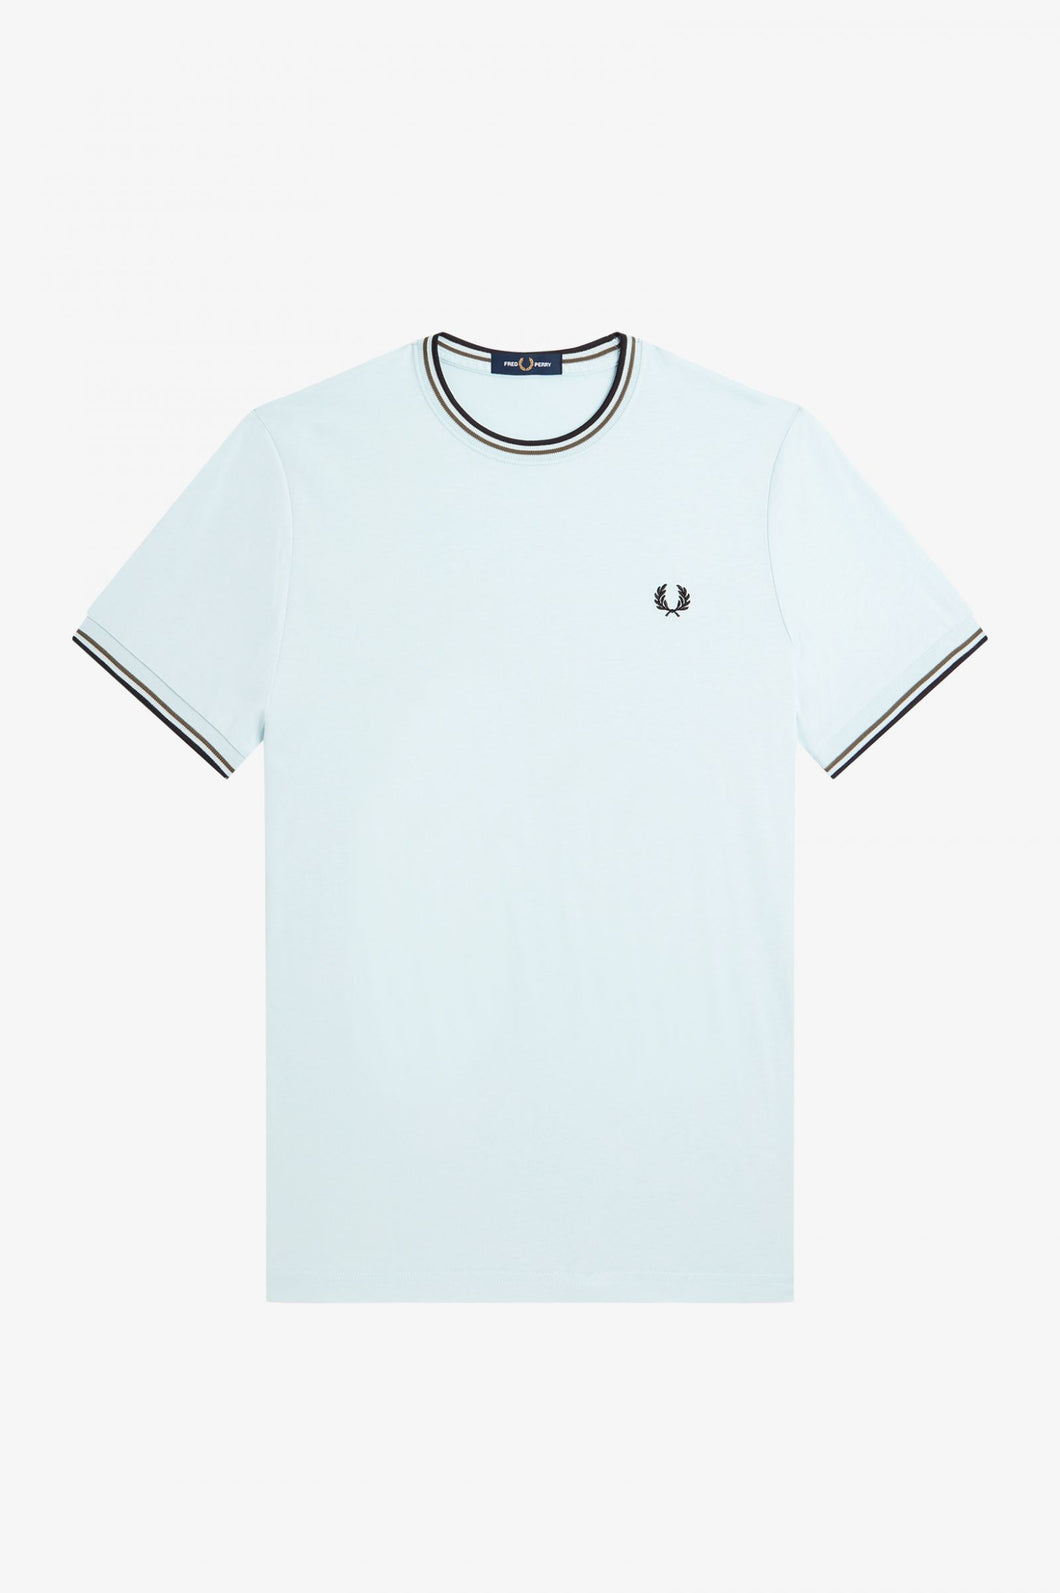 Fred perry Twin Tipped t-shirt, Ice Blue with Navy and Black Tipping